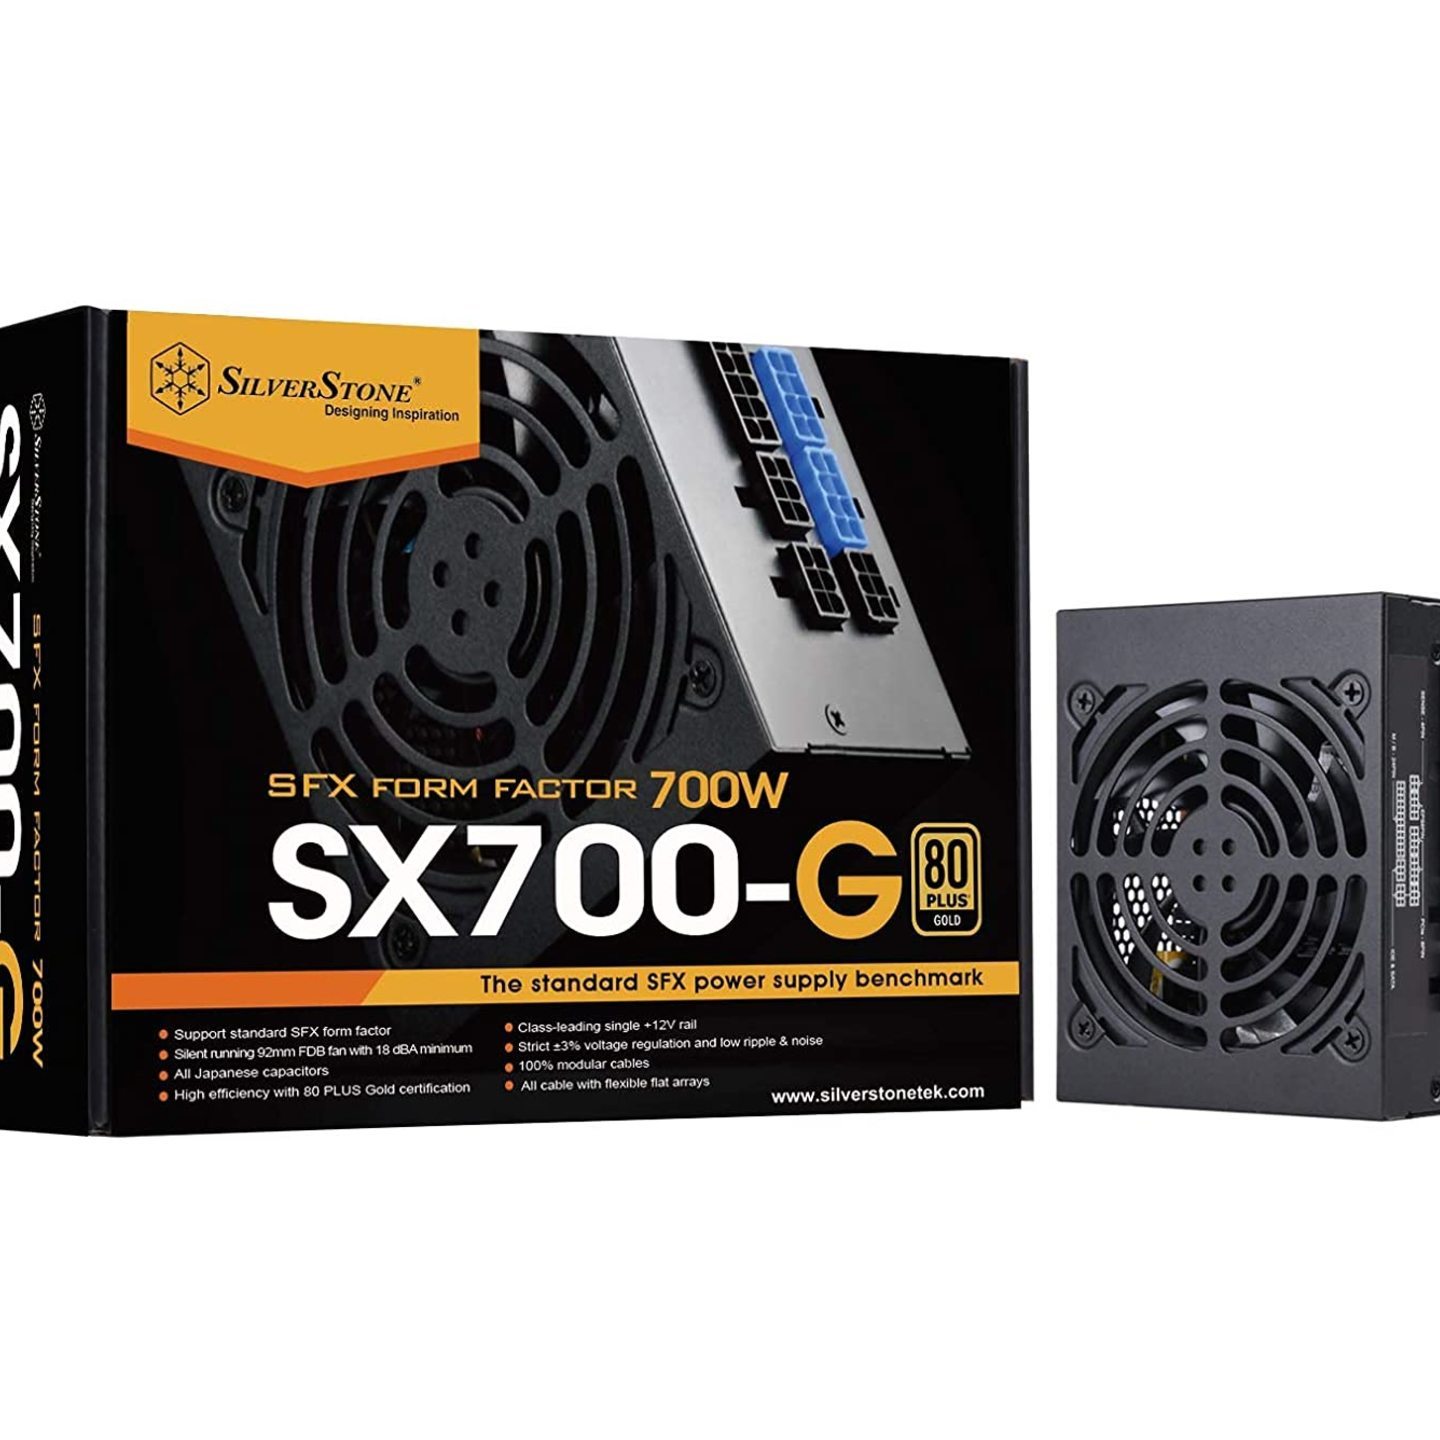 SilverStone Technology SST-SX700-G 700W SFX Fully Modular 80 Plus Gold PSU with Improved 92mm Fan and Japanese Capacitors.